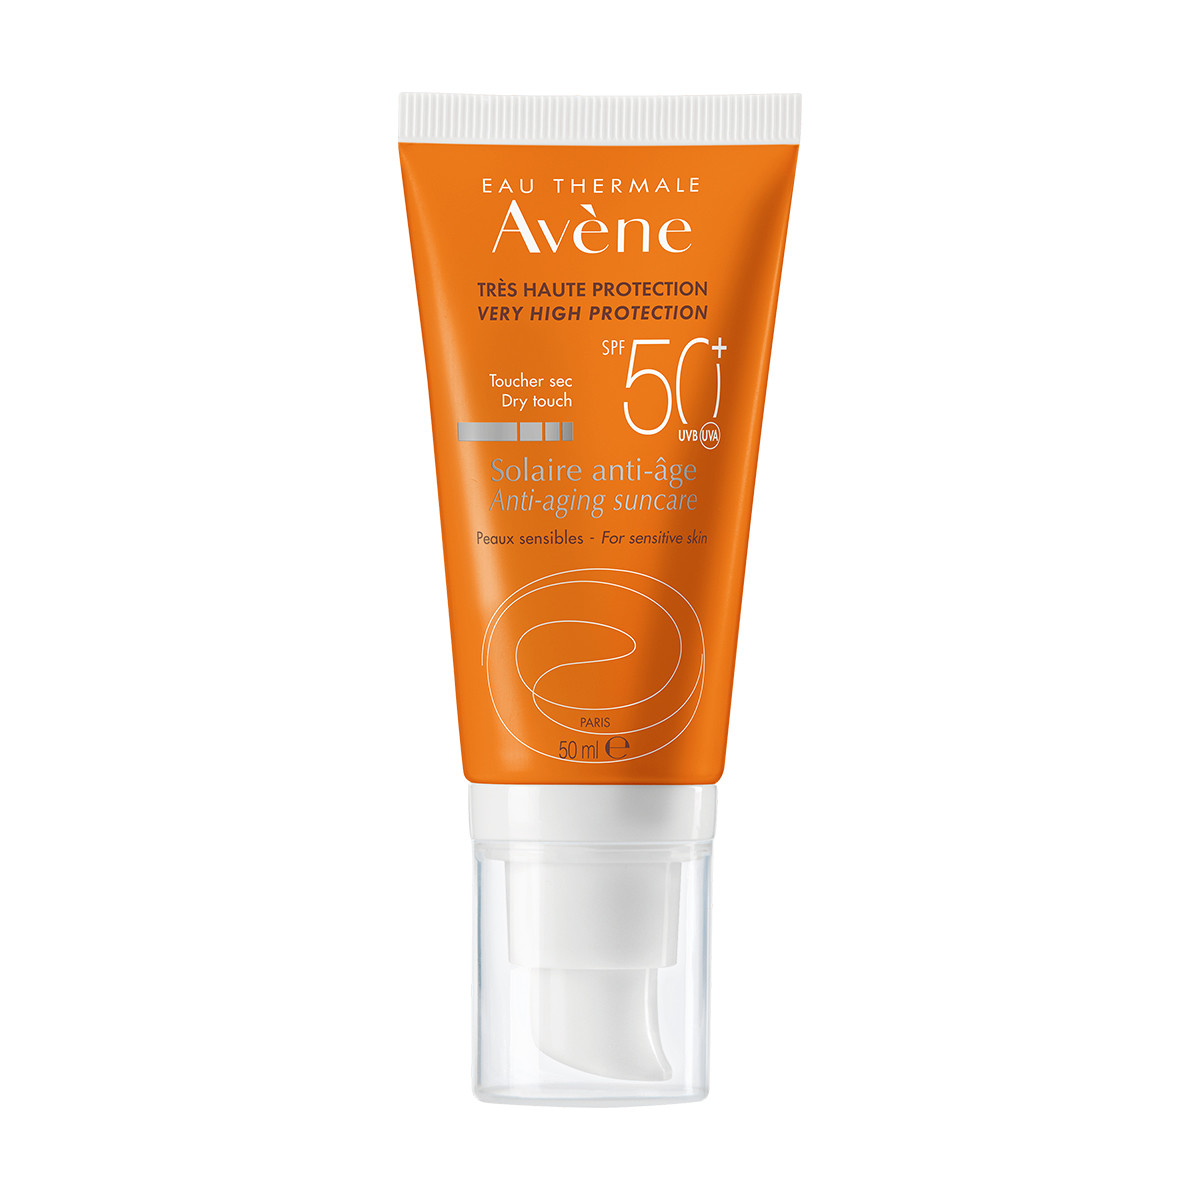 avene eau thermale solaire anti age dry touch spf50 50ml